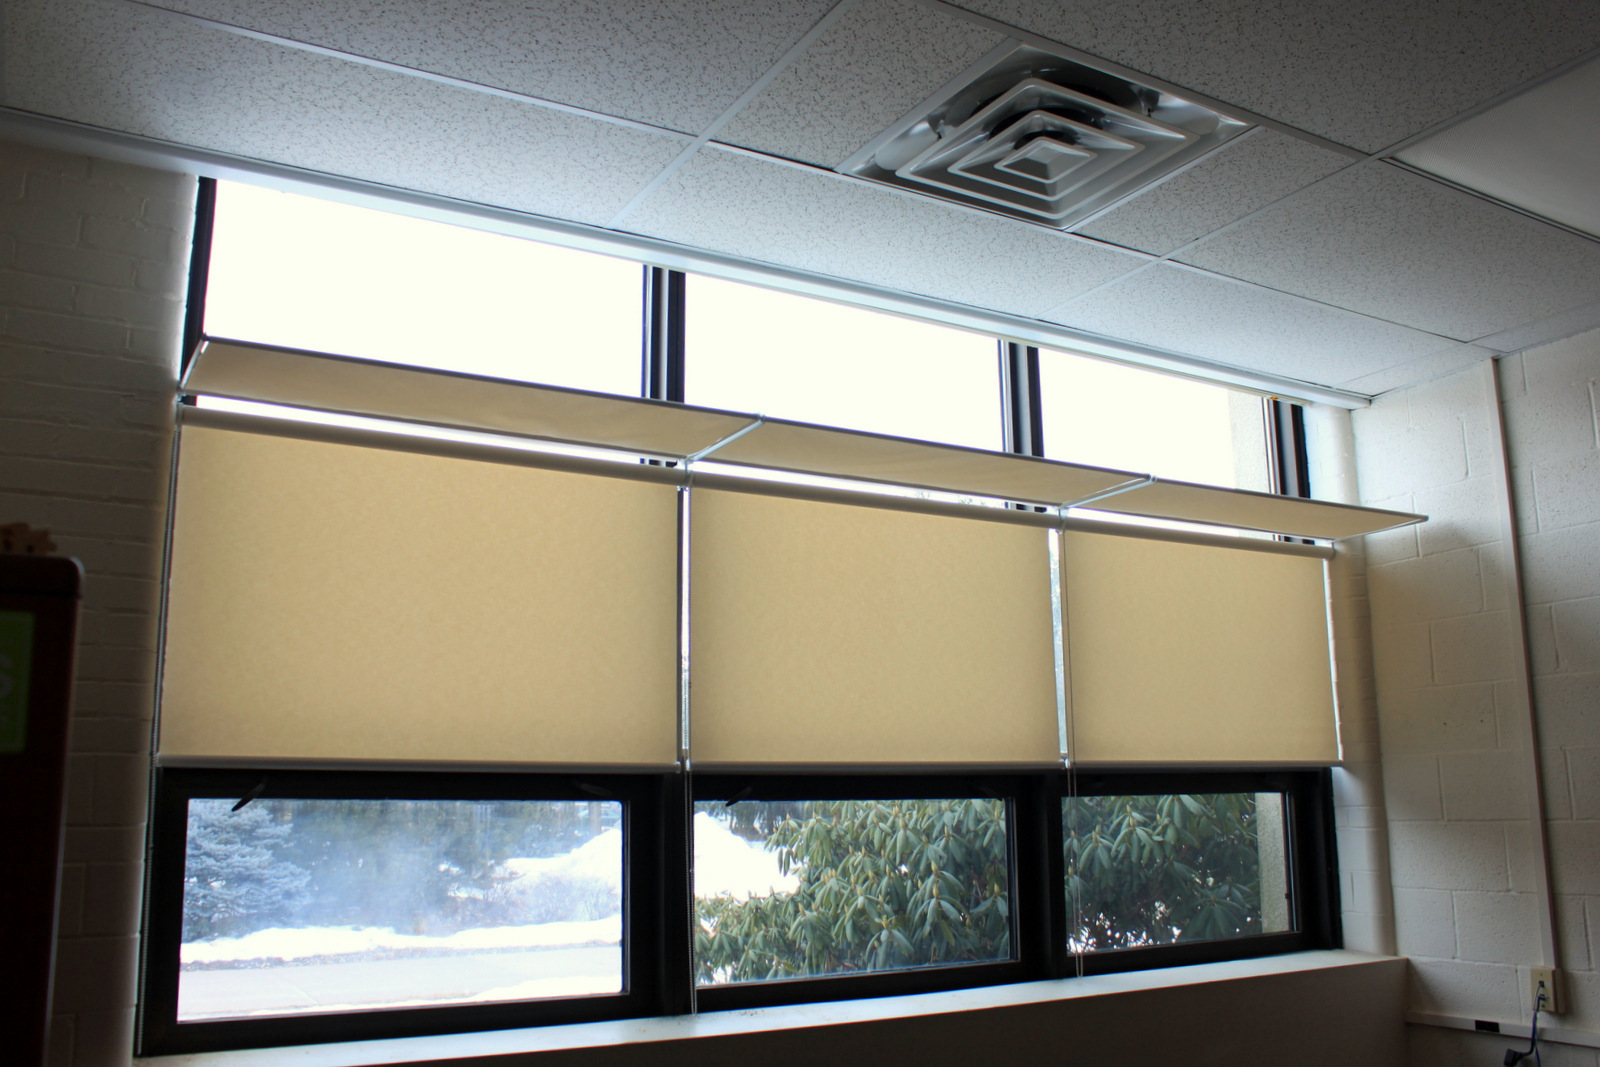 The S Series Dayliter Shade delivers glare-free daylight